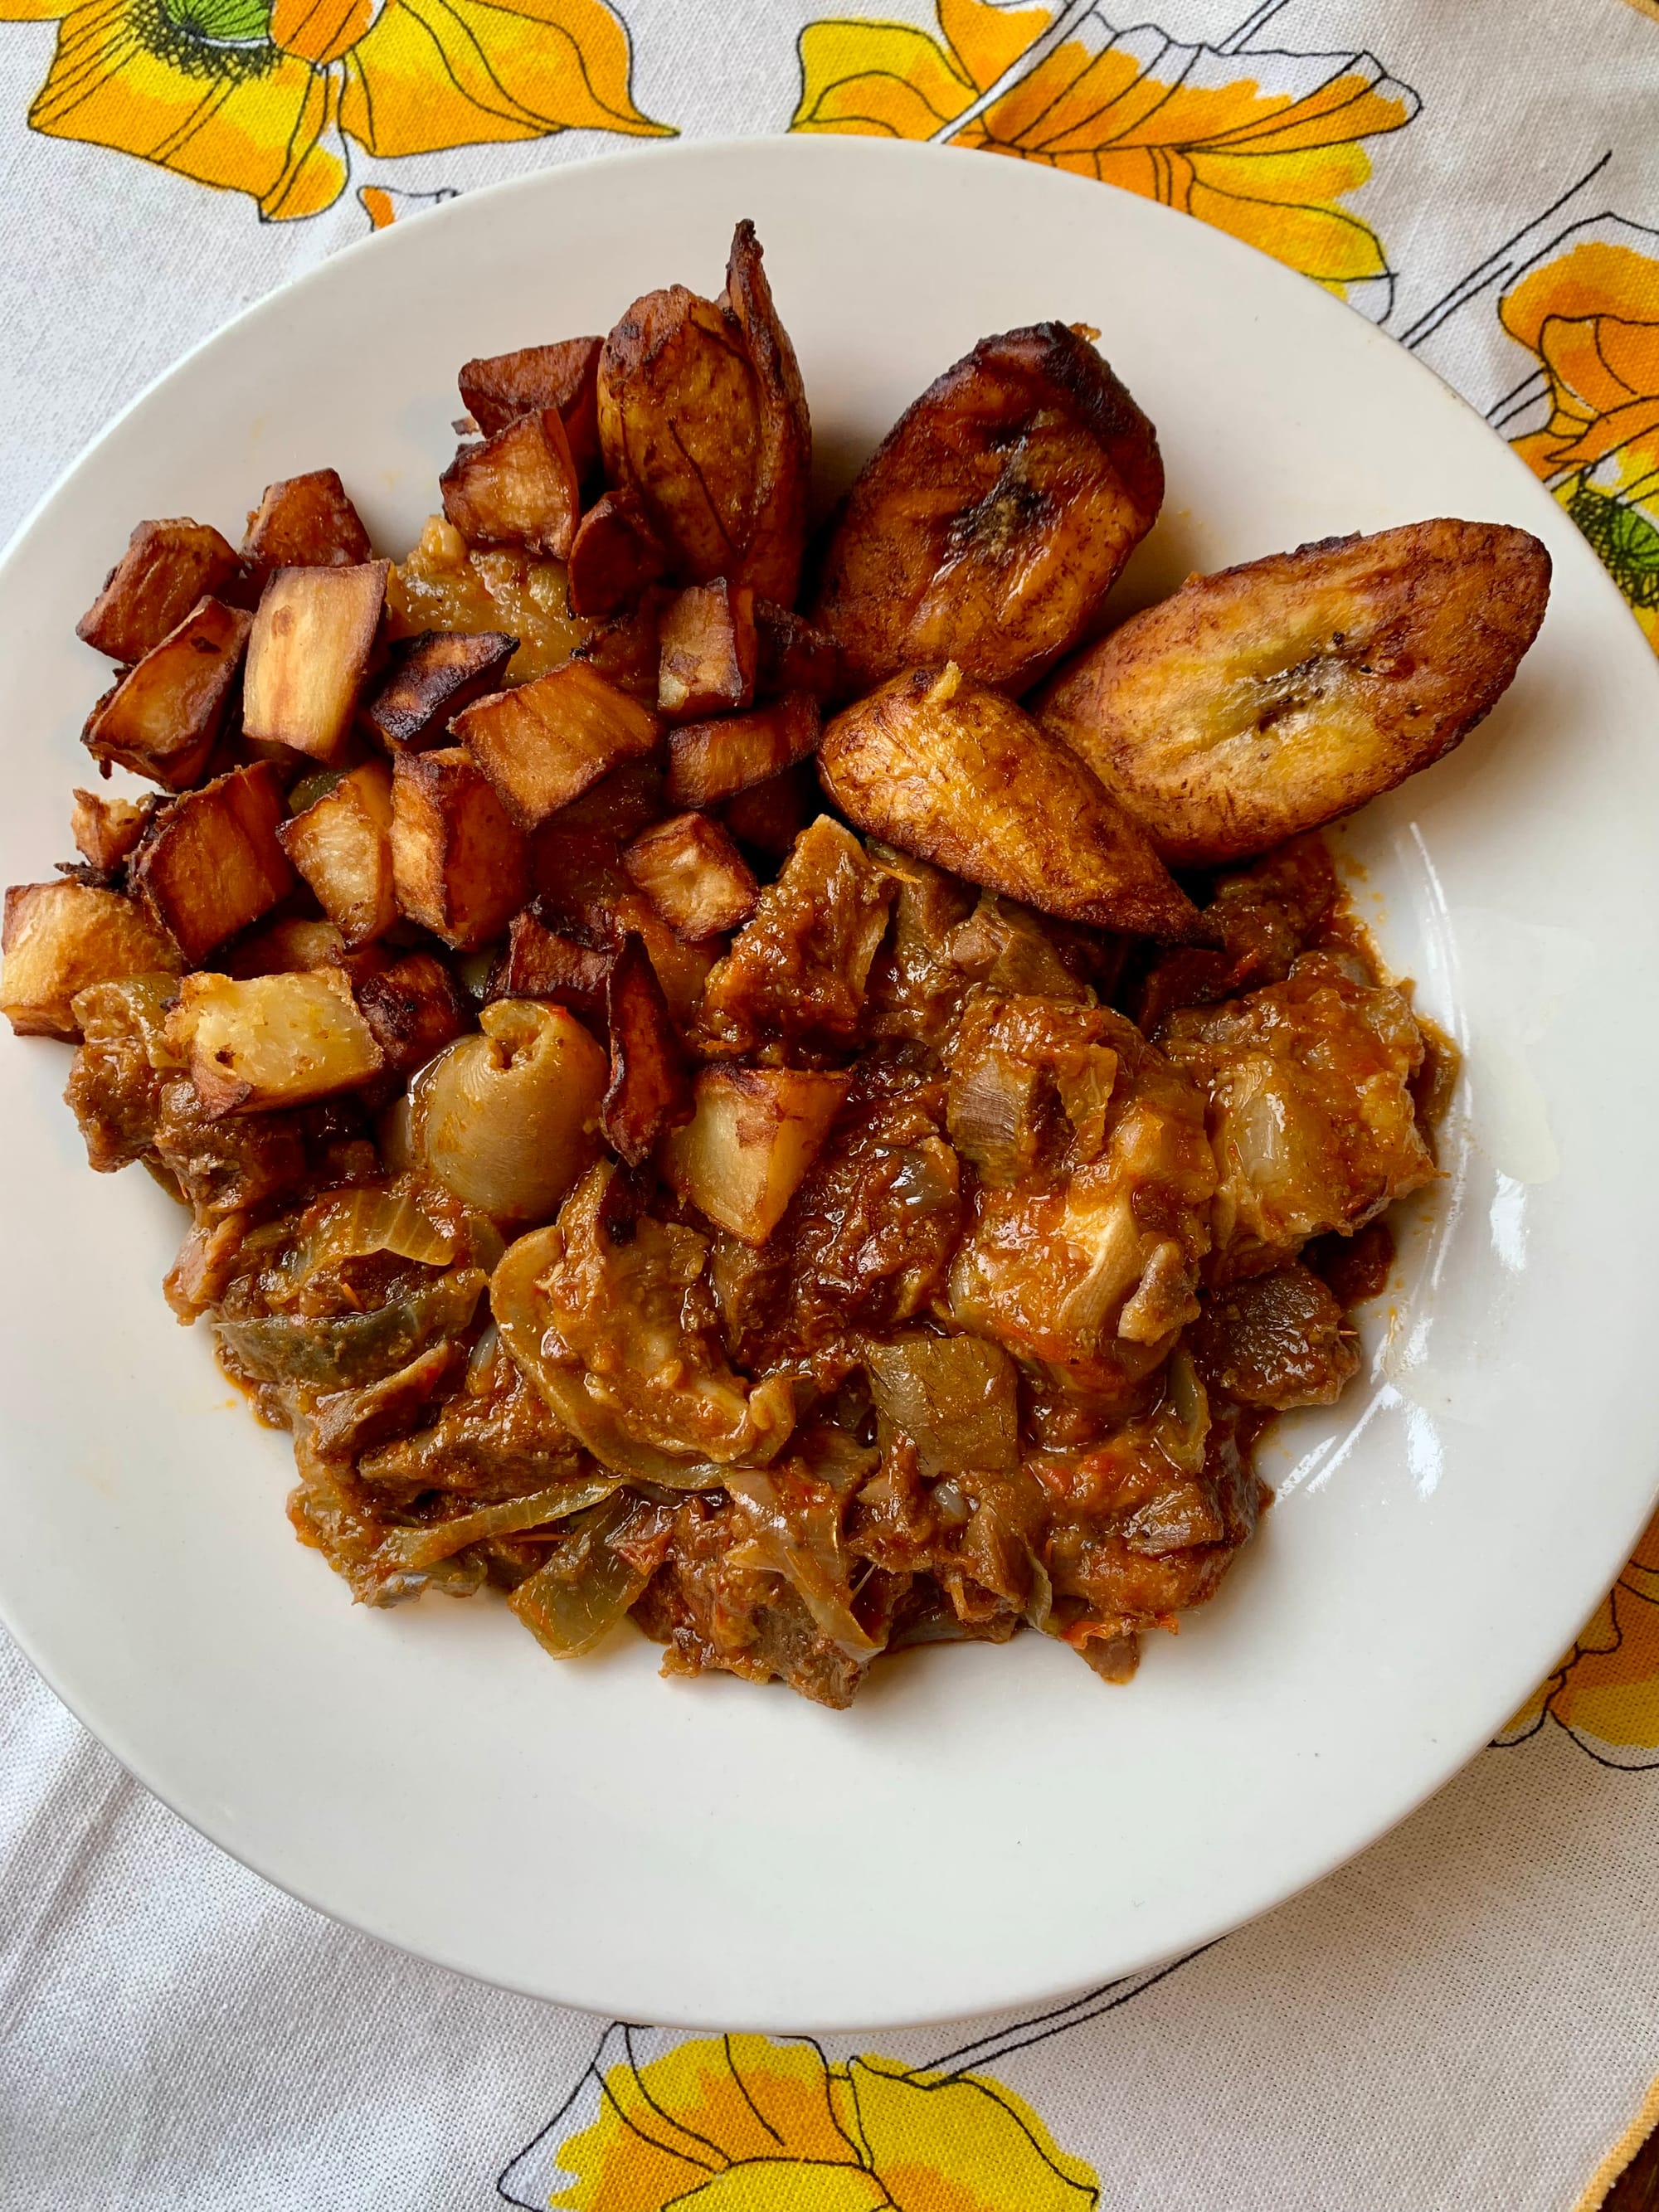 Eko Kitchen takeout I ordered during the pandemic: asun with sweet potatoes and fried plantains, and obe ata dindin (fried pepper stew). Photo: © tablehopper.com.